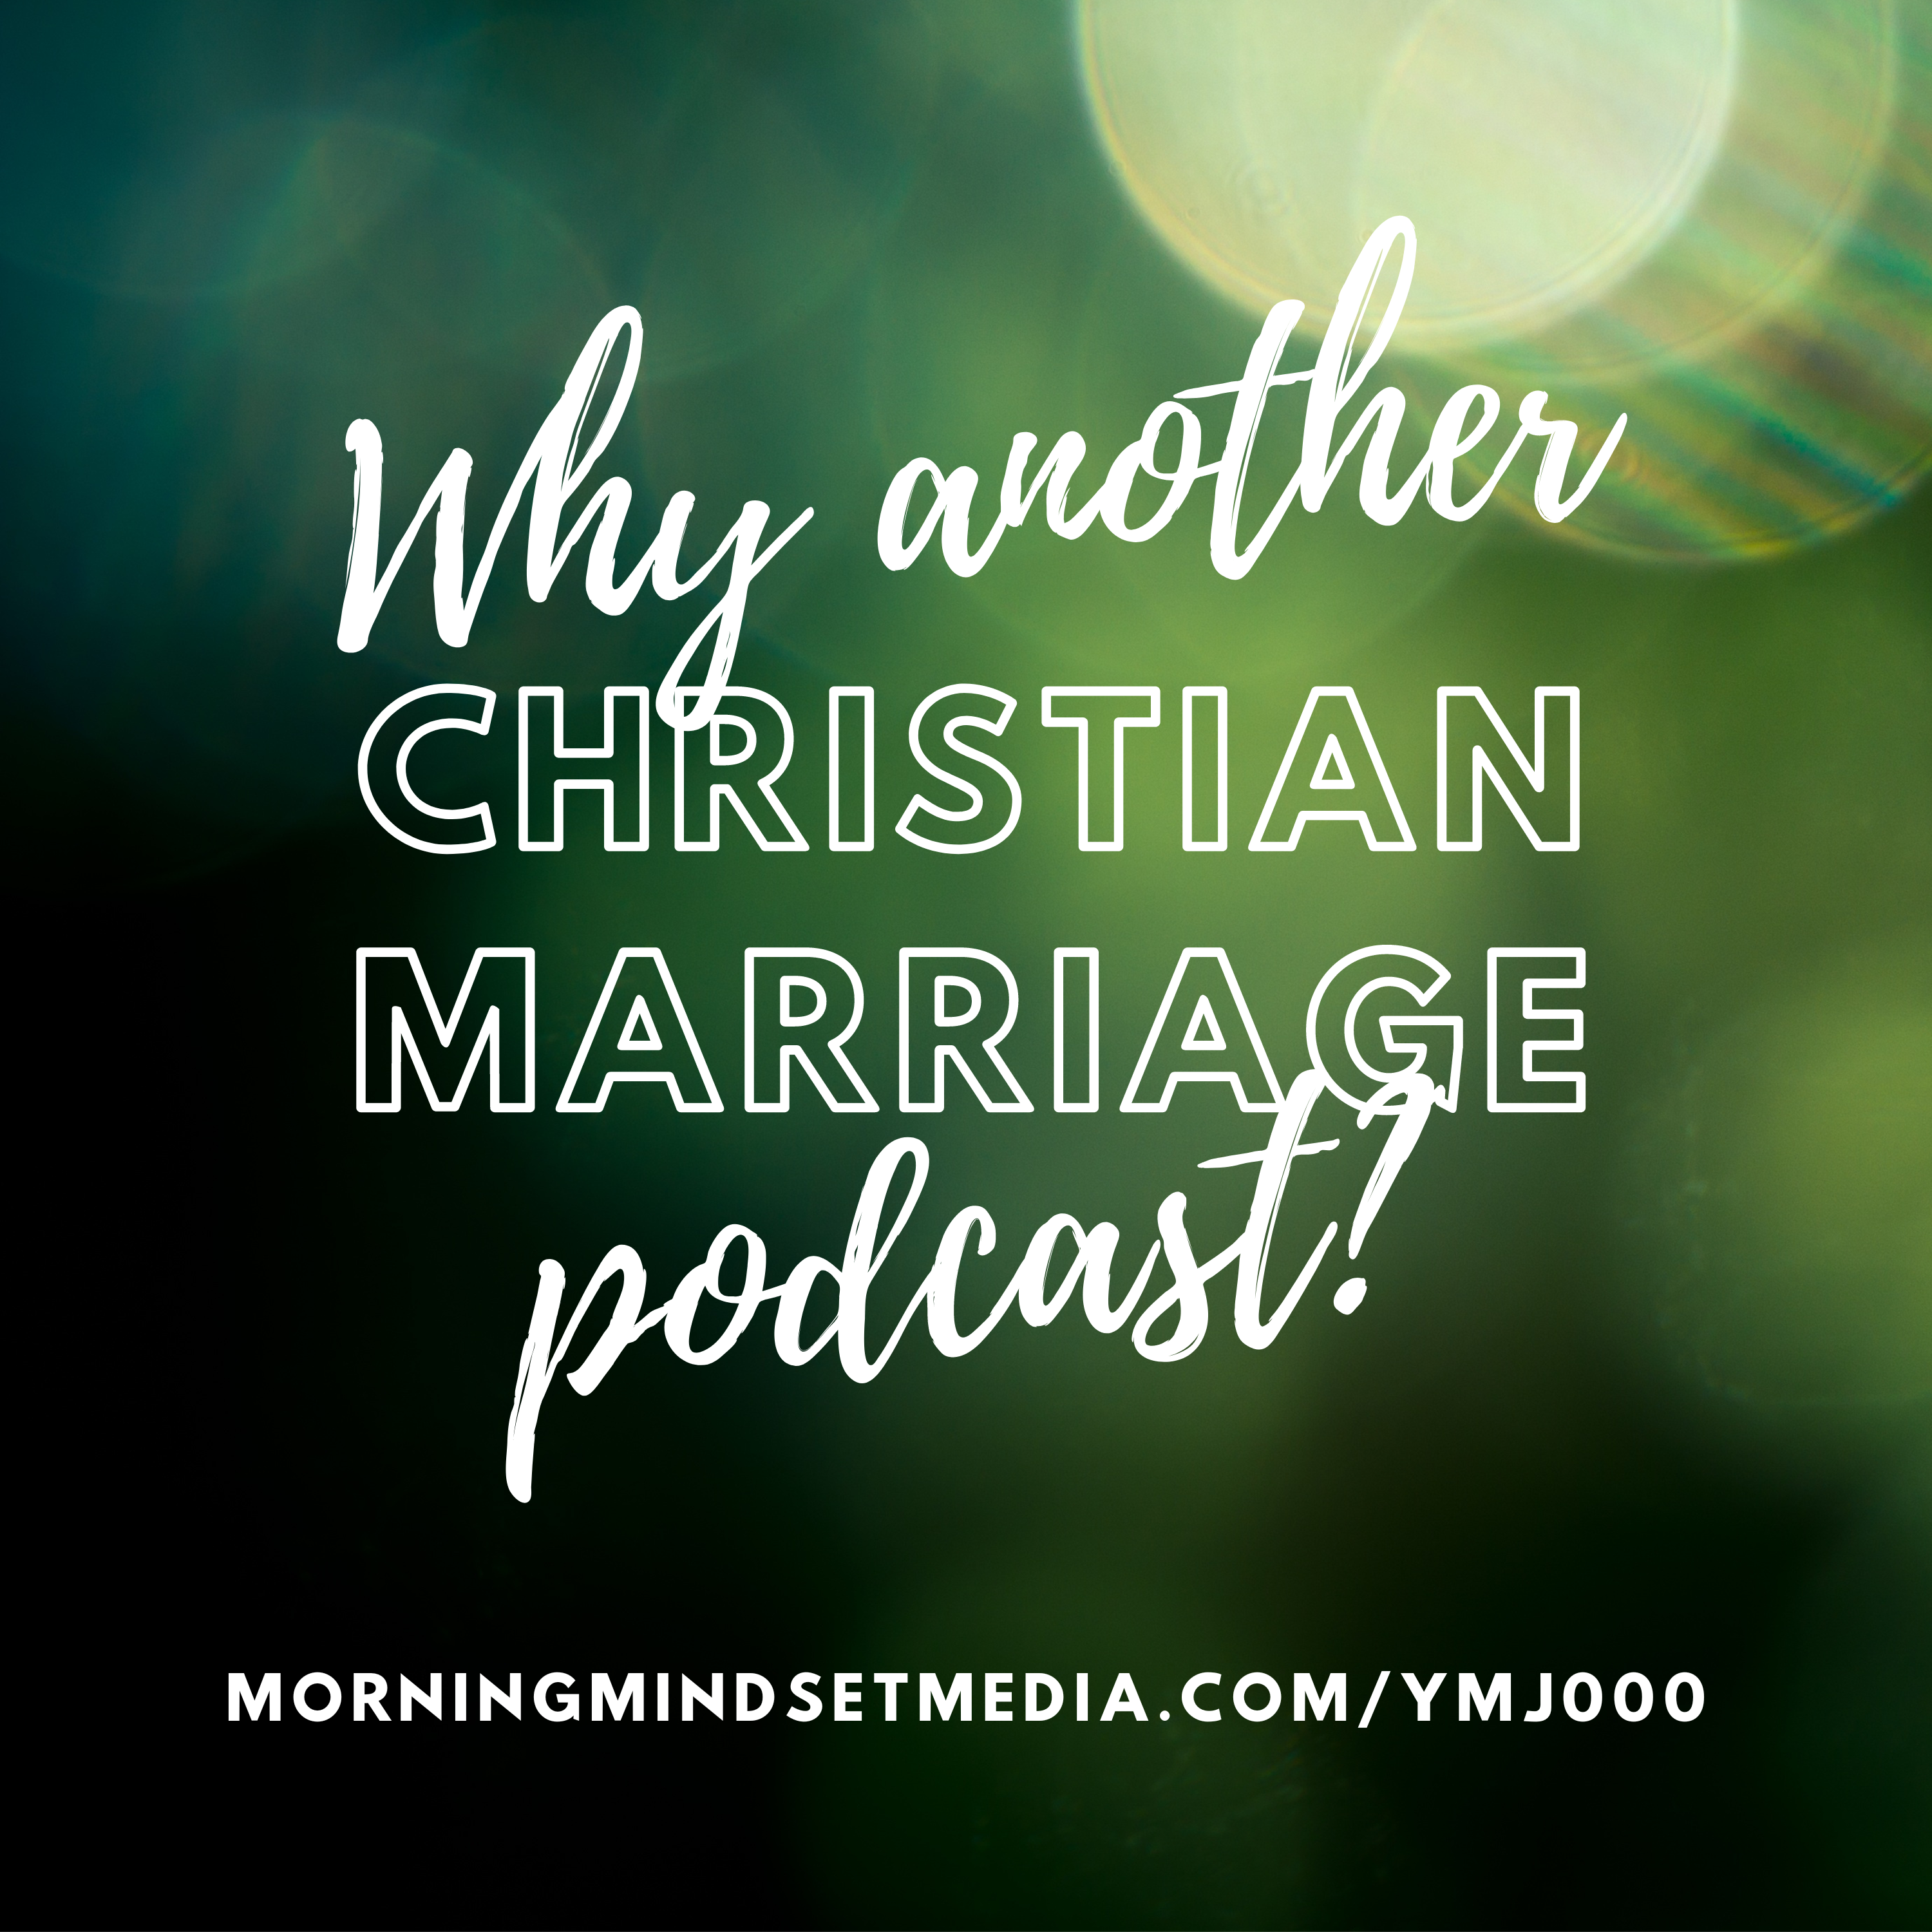 000: Why another marriage podcast?